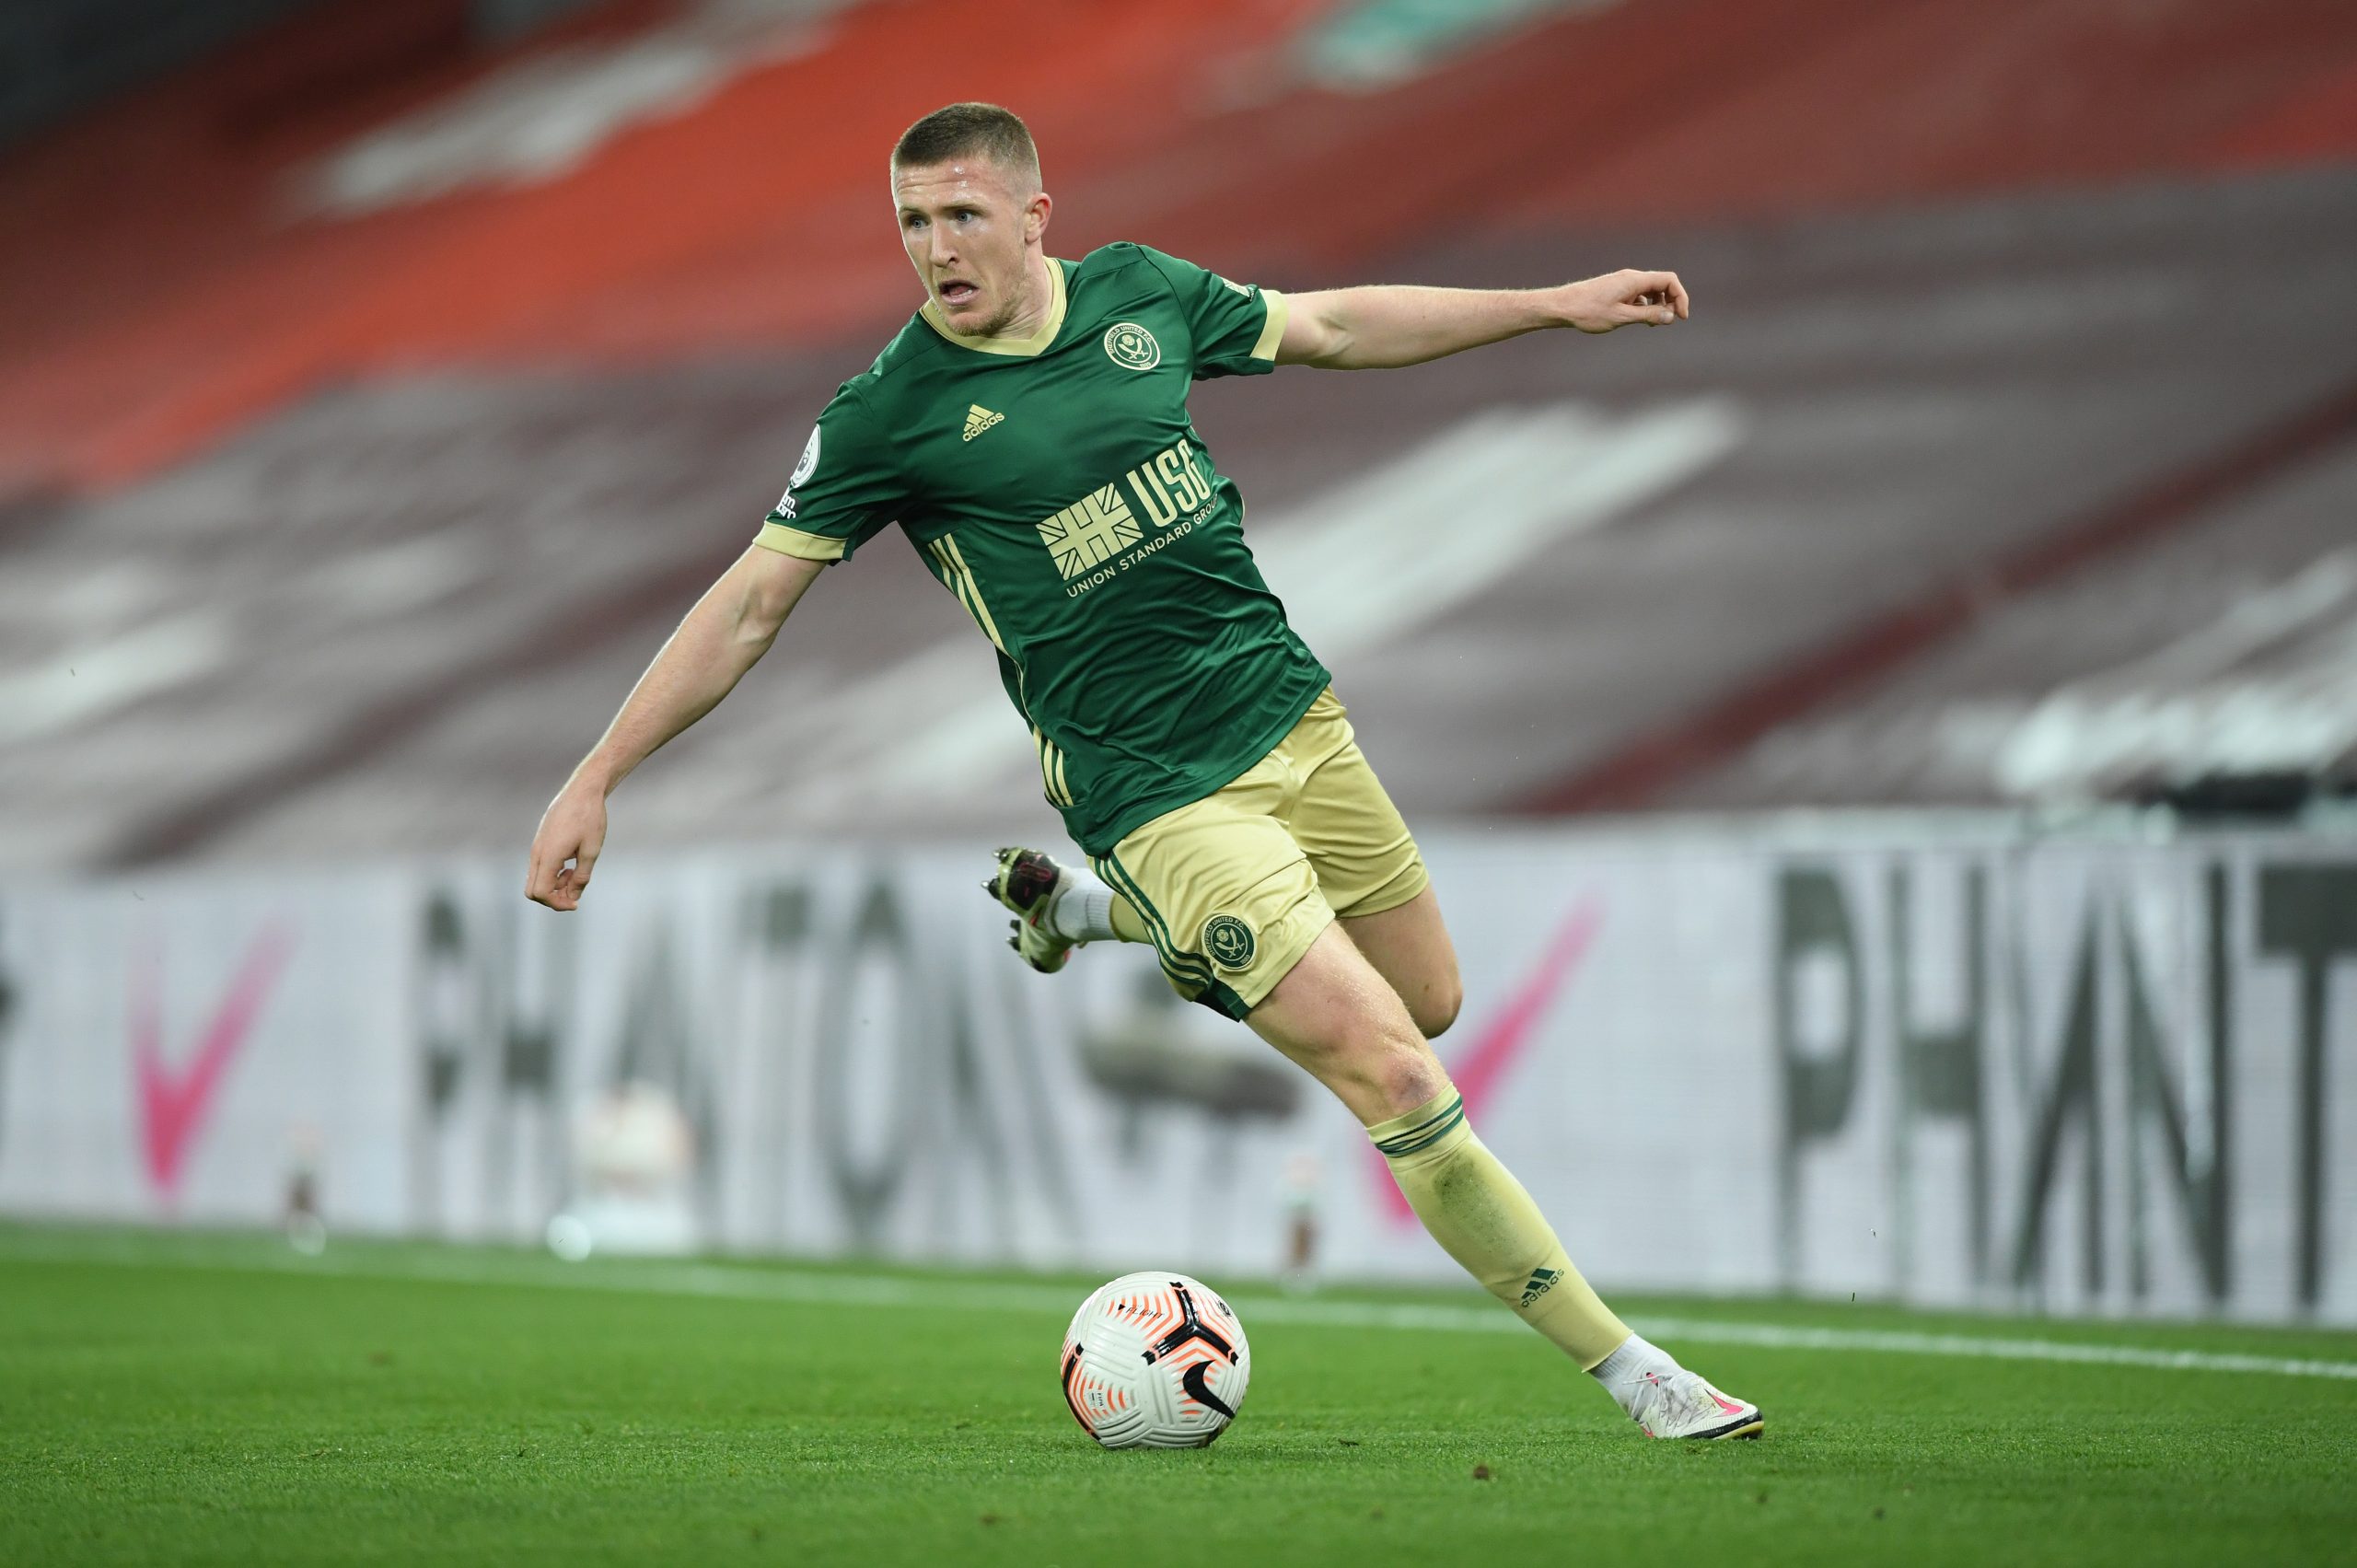 Lundstram has been linked with a move away from Sheffield United.